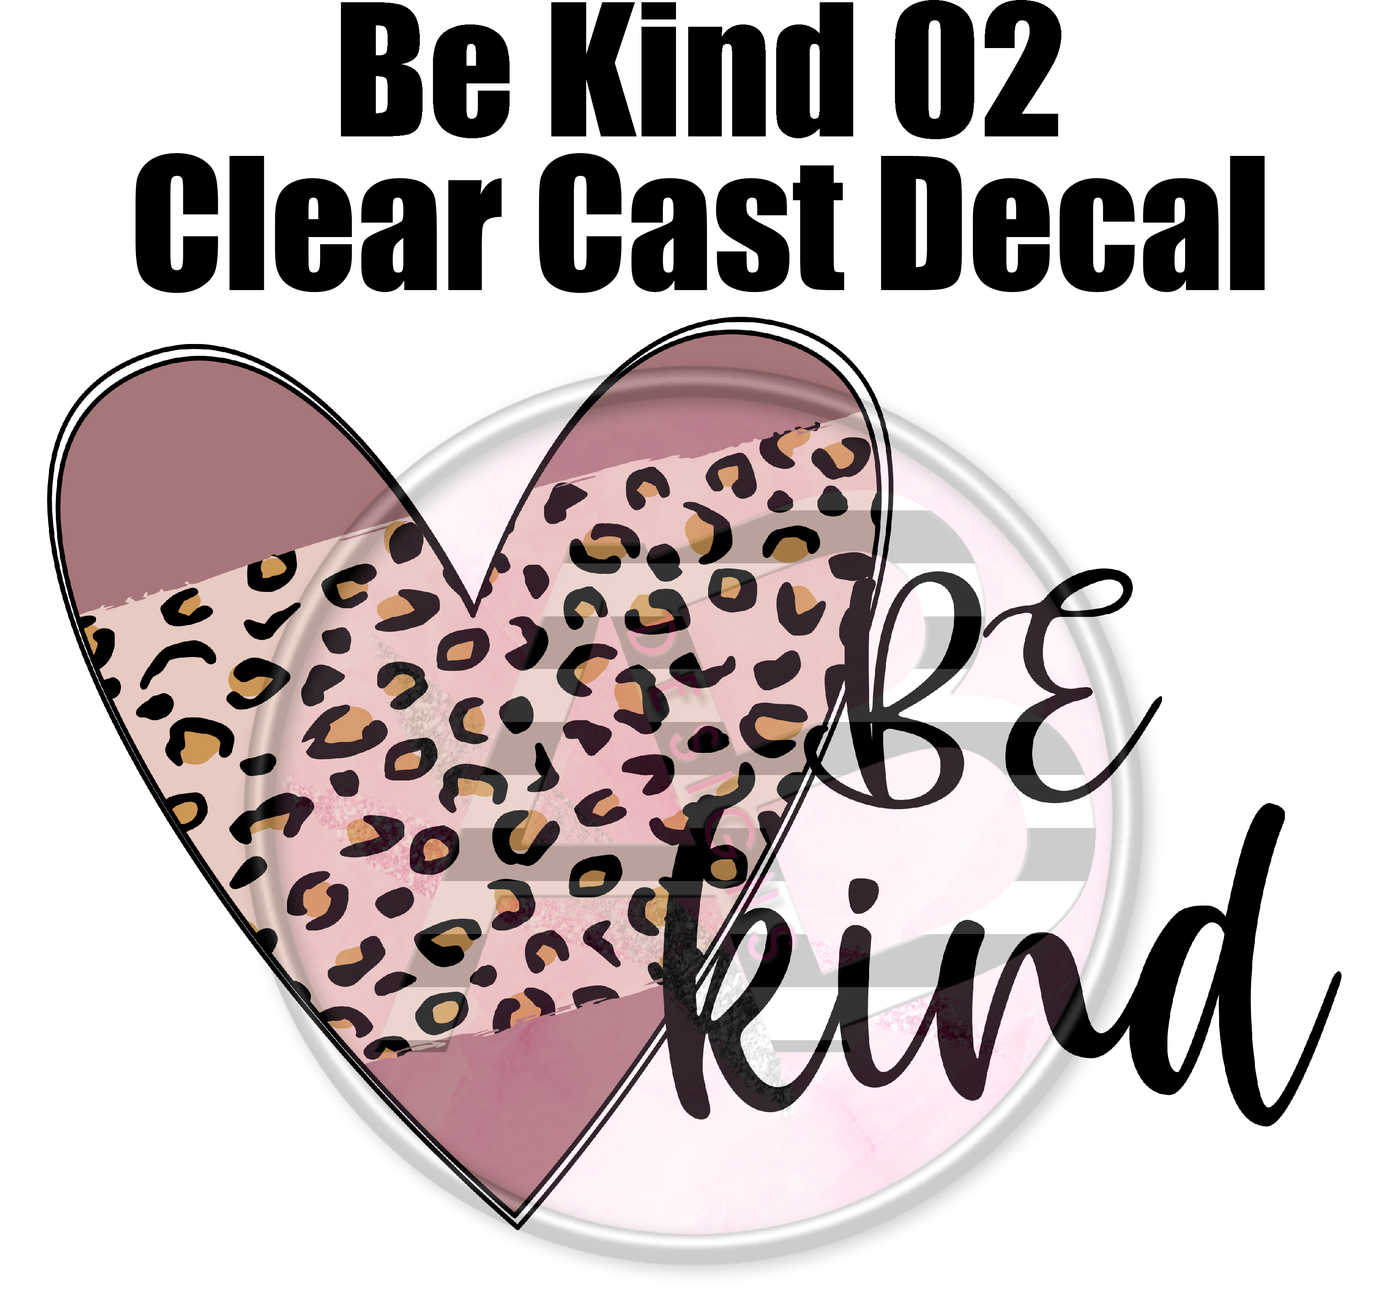 Be Kind 02 - Clear Cast Decal